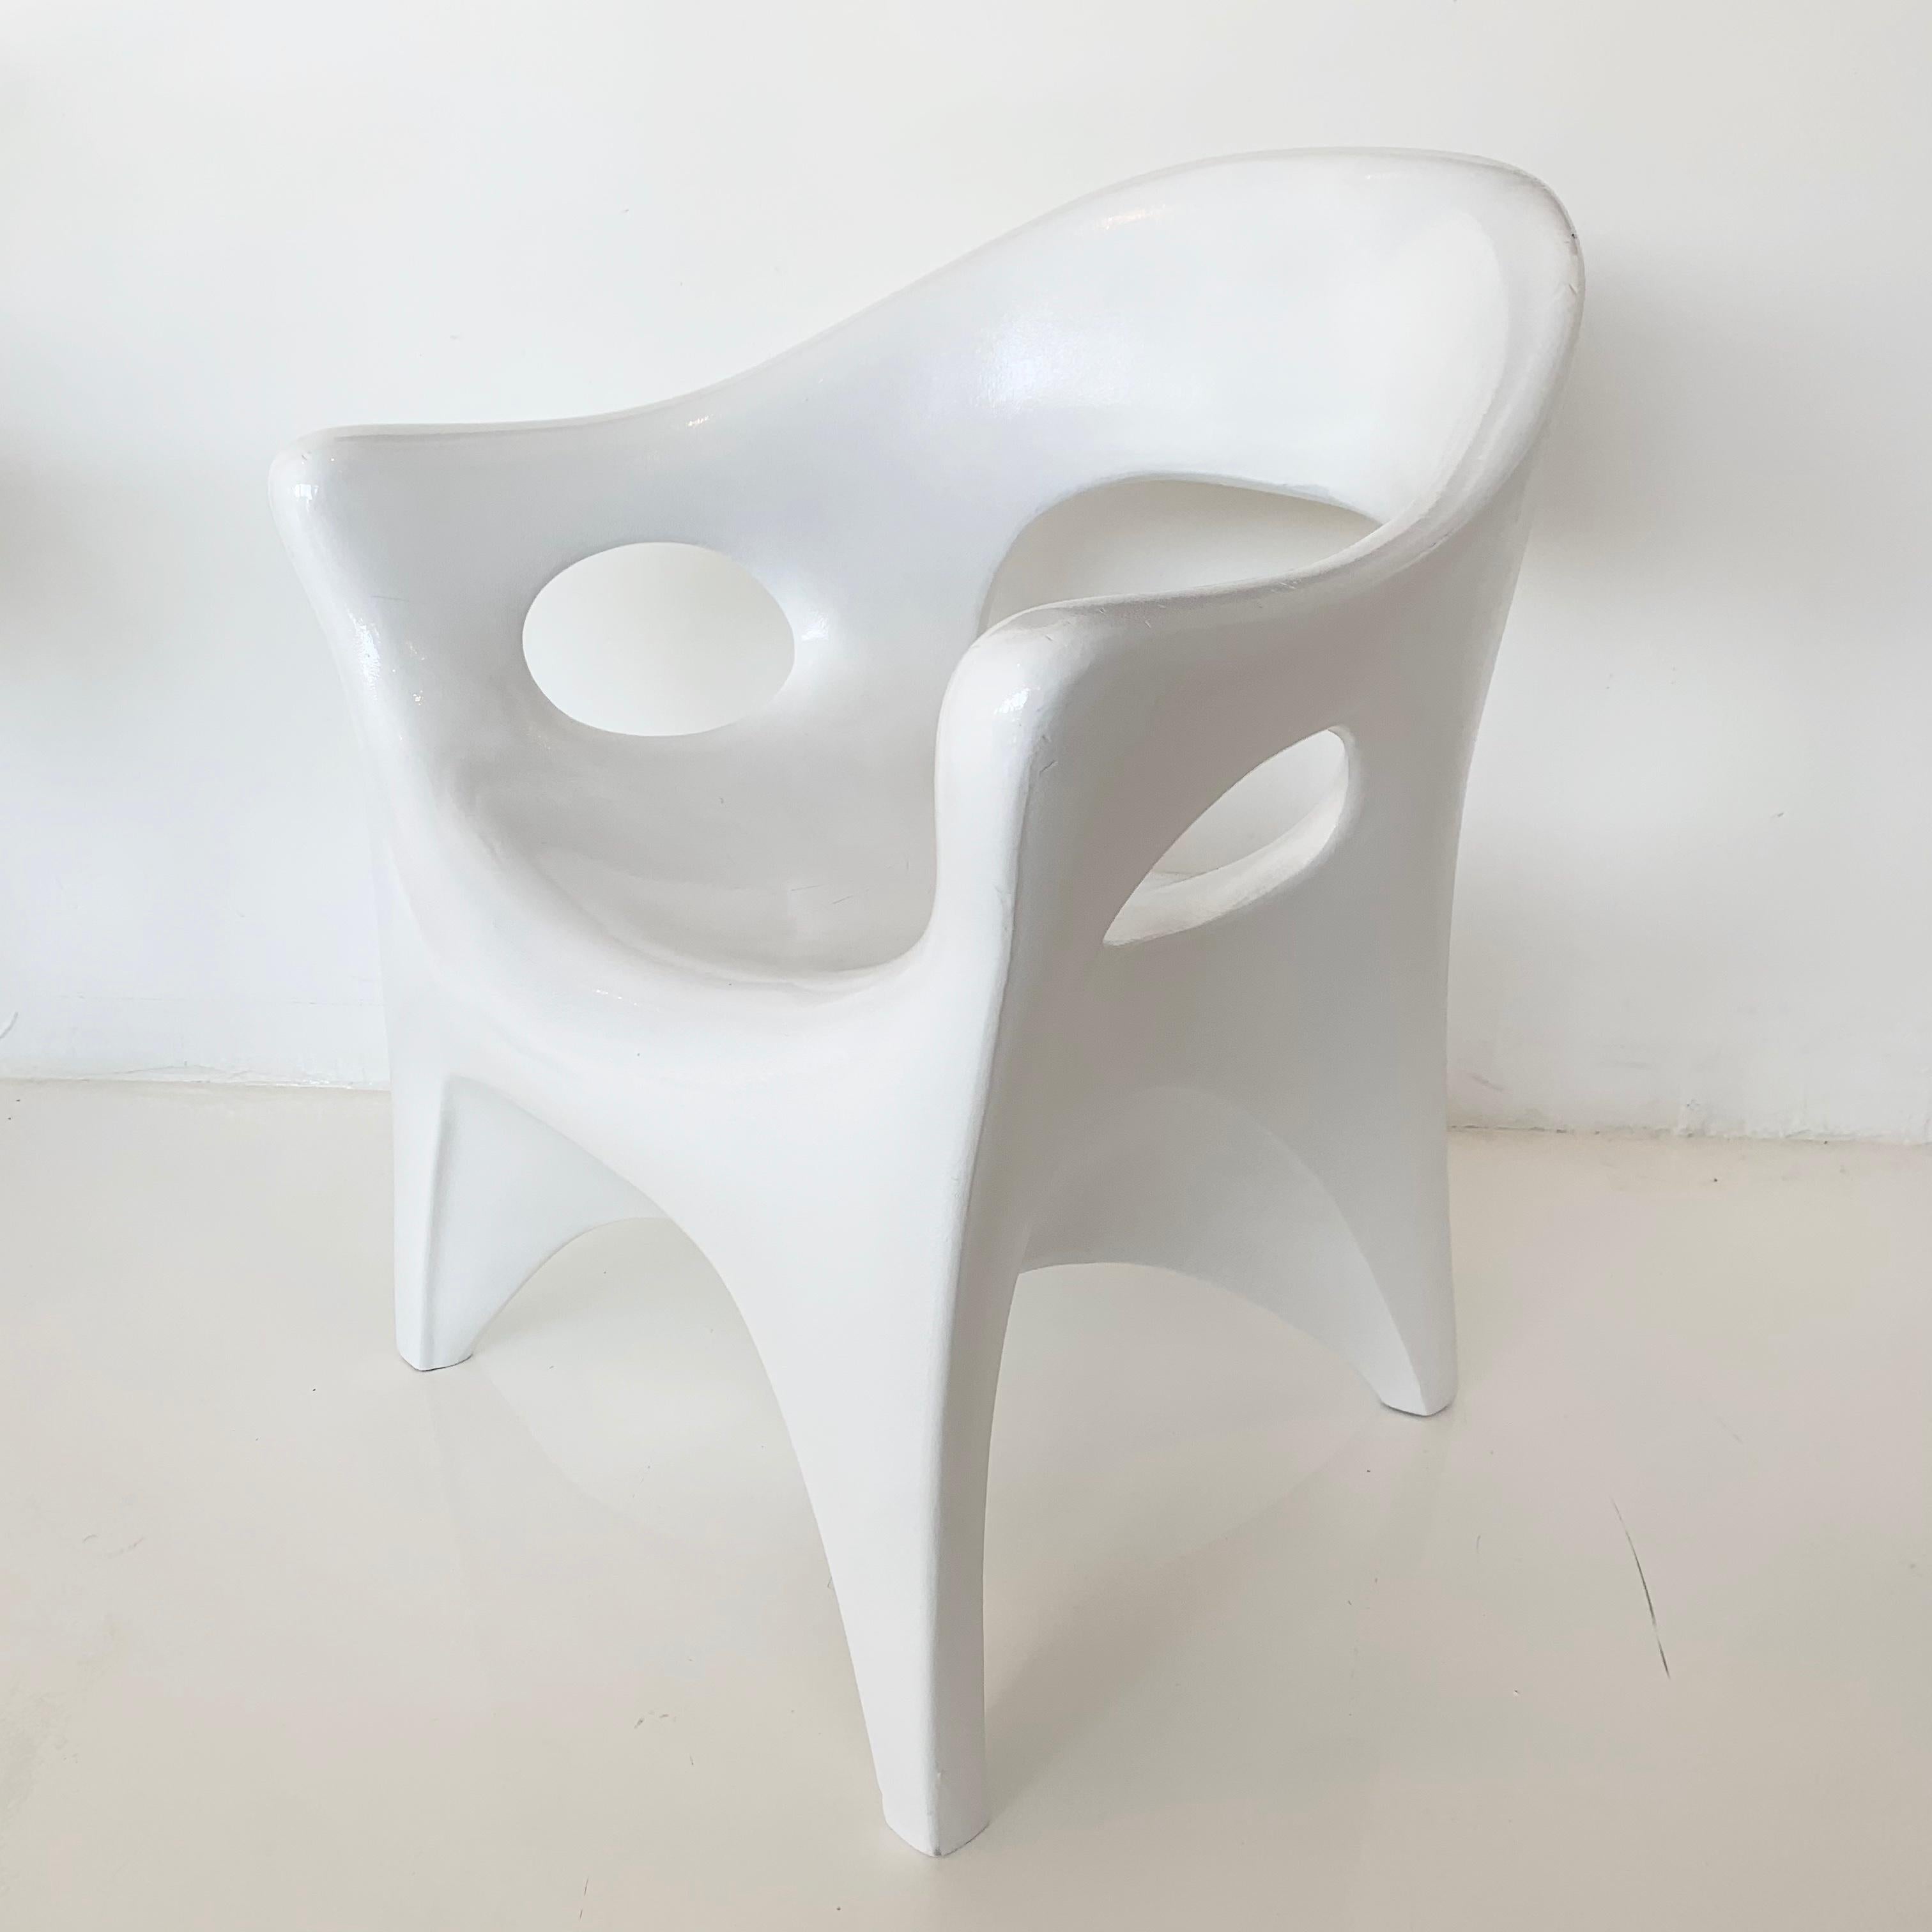 American Set of 4 Sculptural Plastic Chairs by John Gale, 1963 For Sale